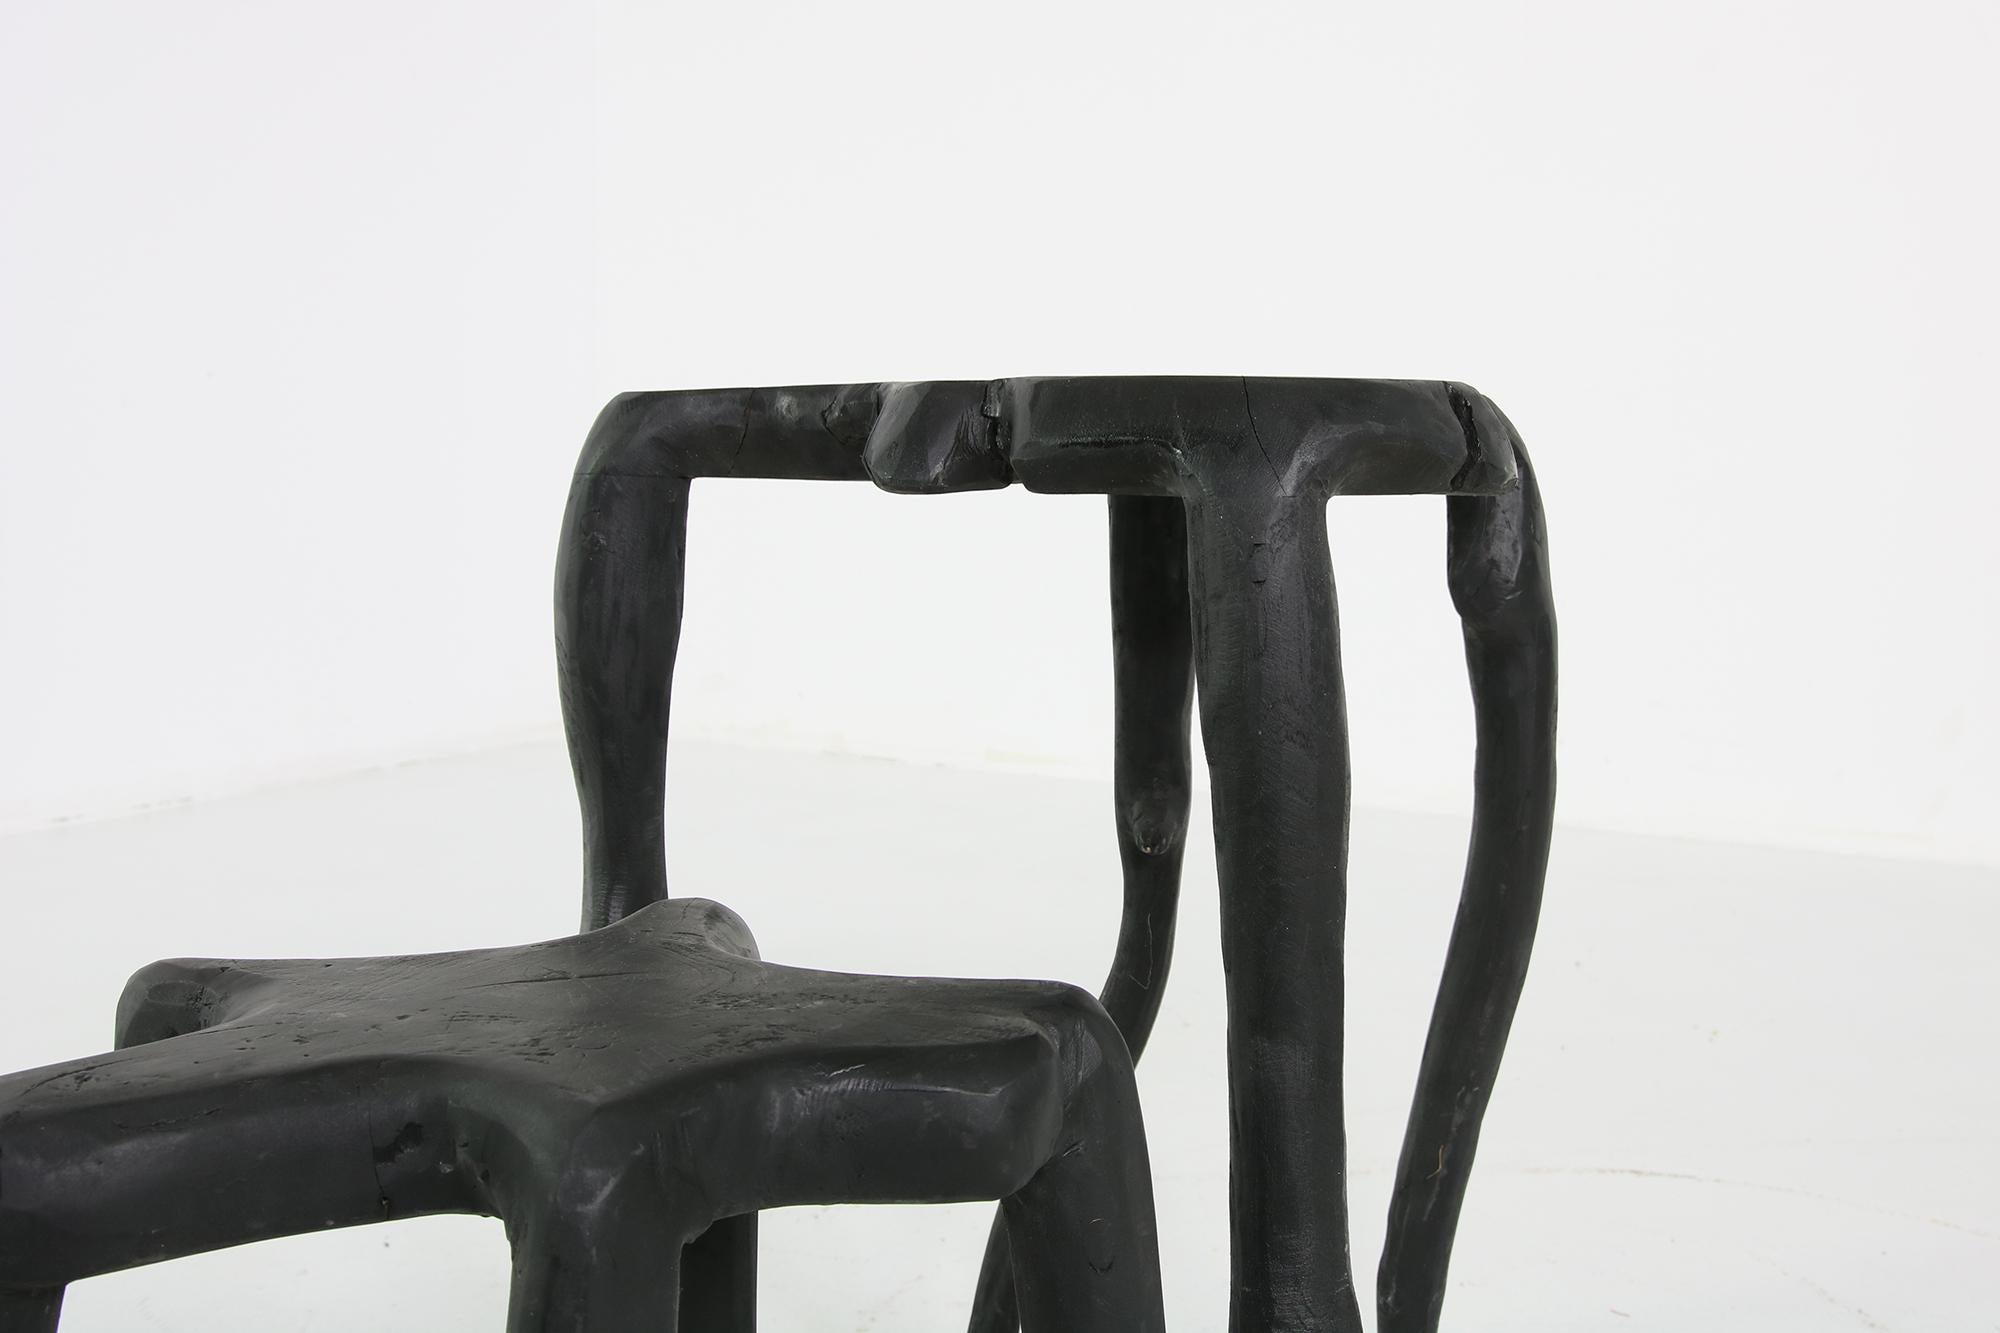 Modern Set of Two Sculptural Wooden Side Tables in Black, Root Wood, Nesting Tables